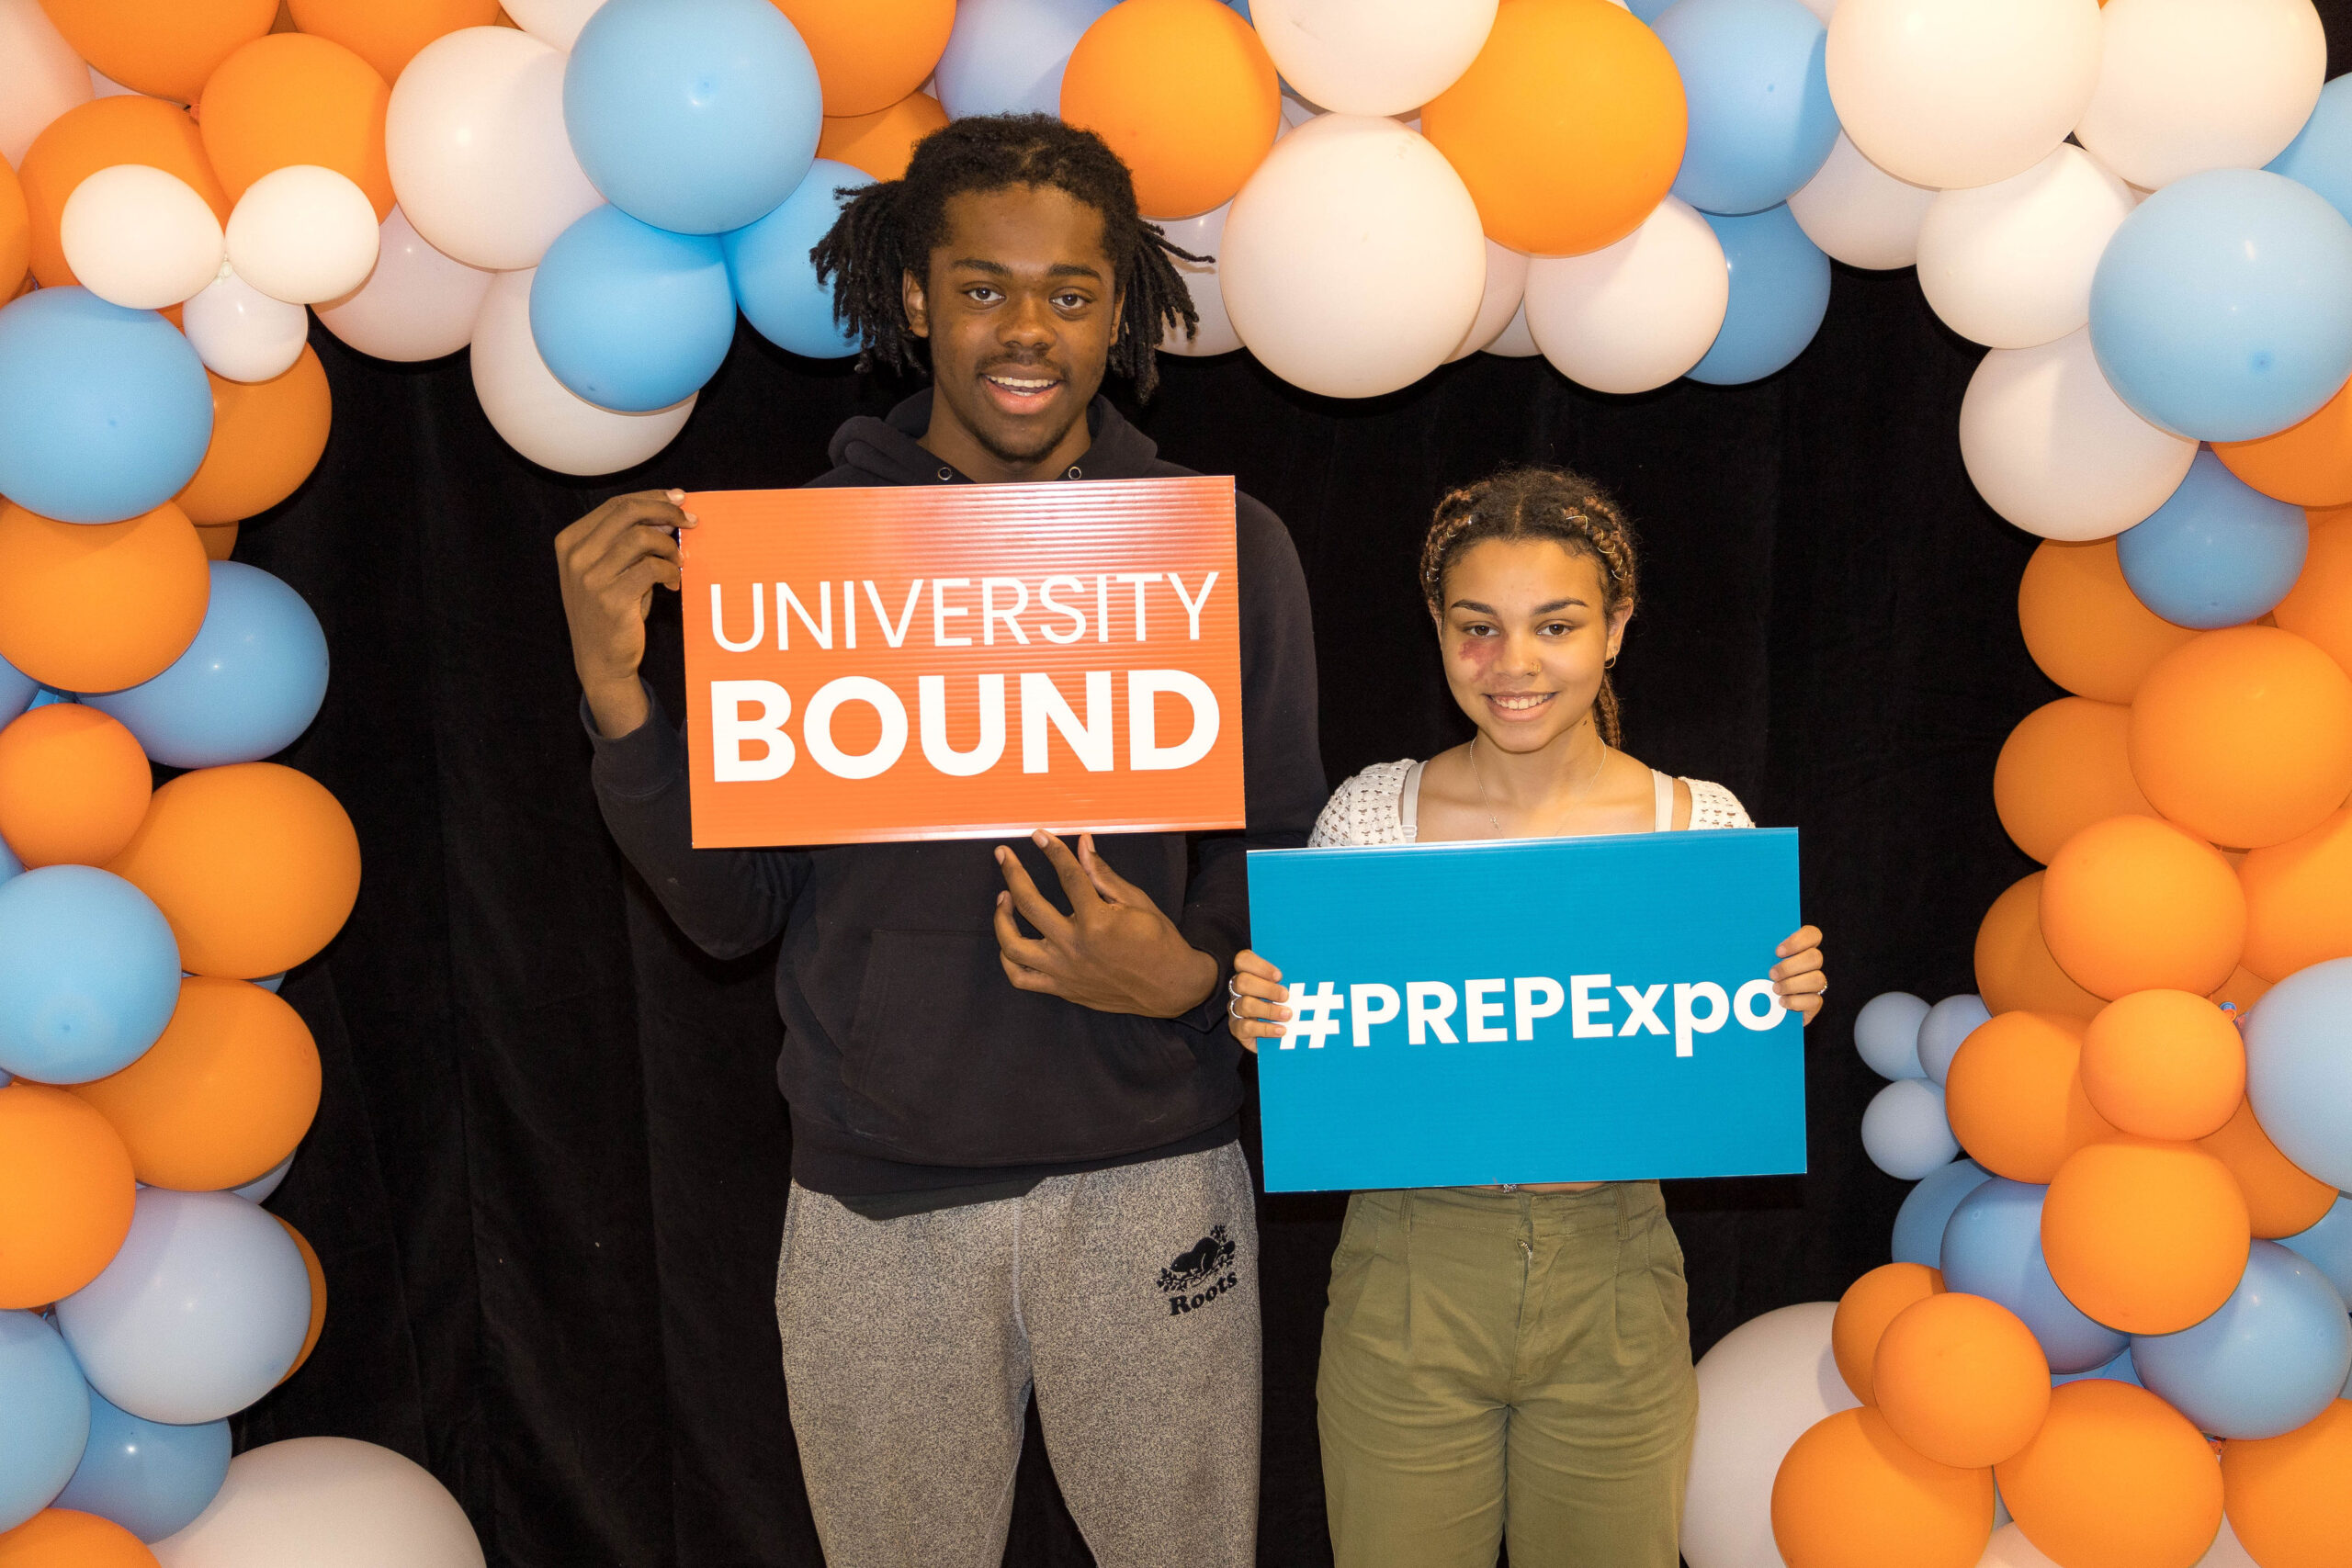 Two young people stand in front of a balloon arch. The balloons are white, orange, and blue. Both people are smiling and holding signs about PREP Academy.